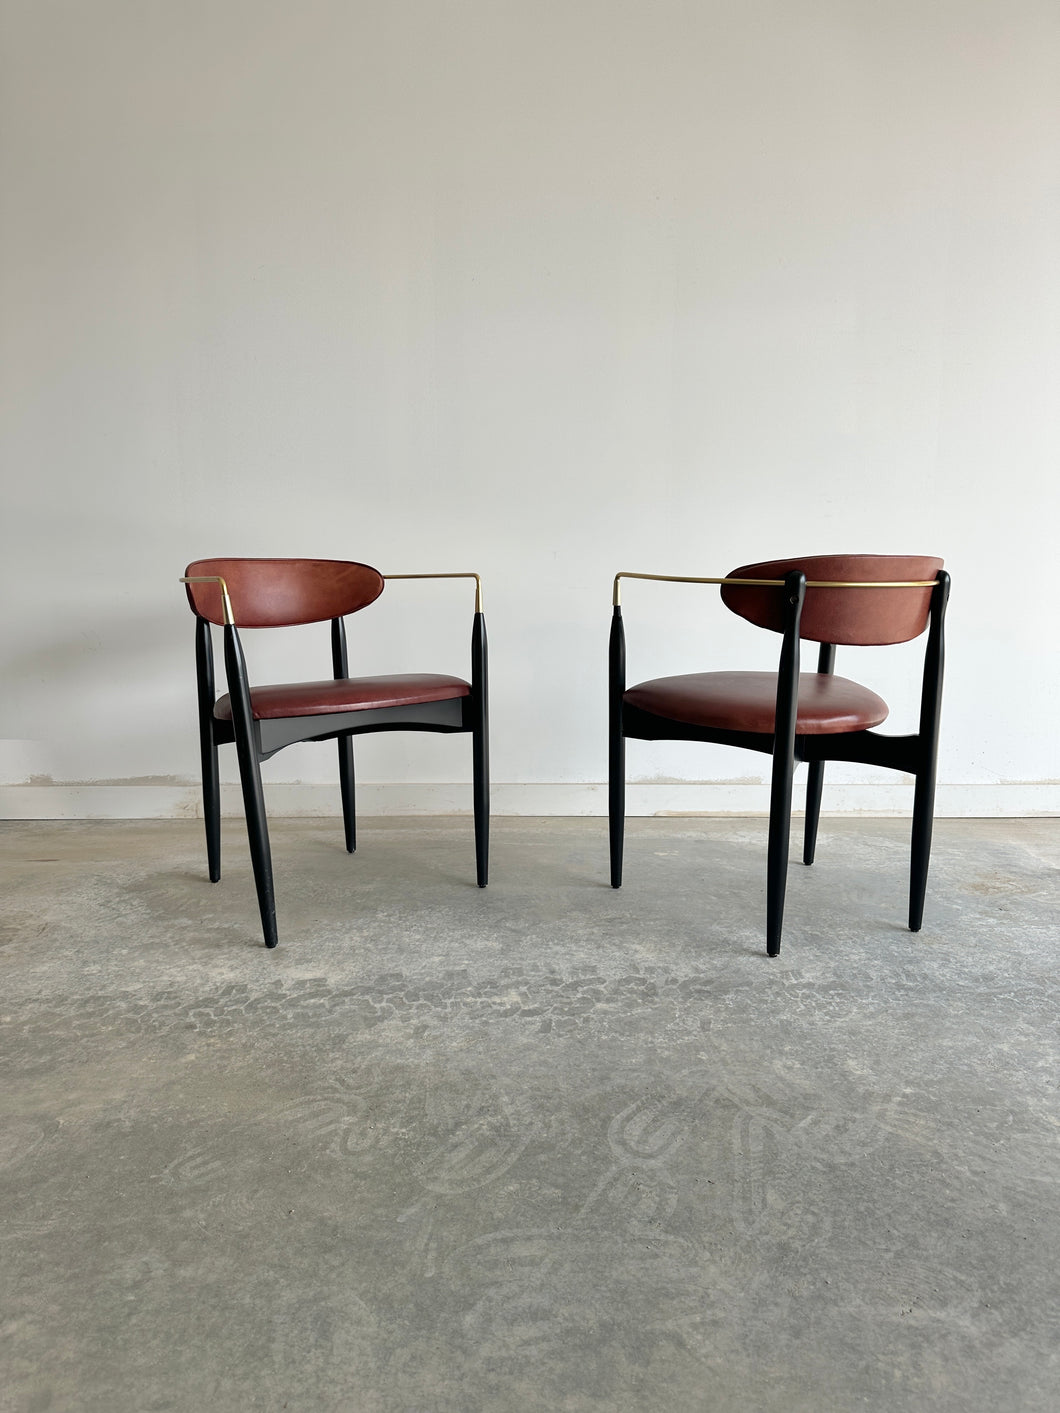 Deep red leather Viscount chairs by Dan Johnson